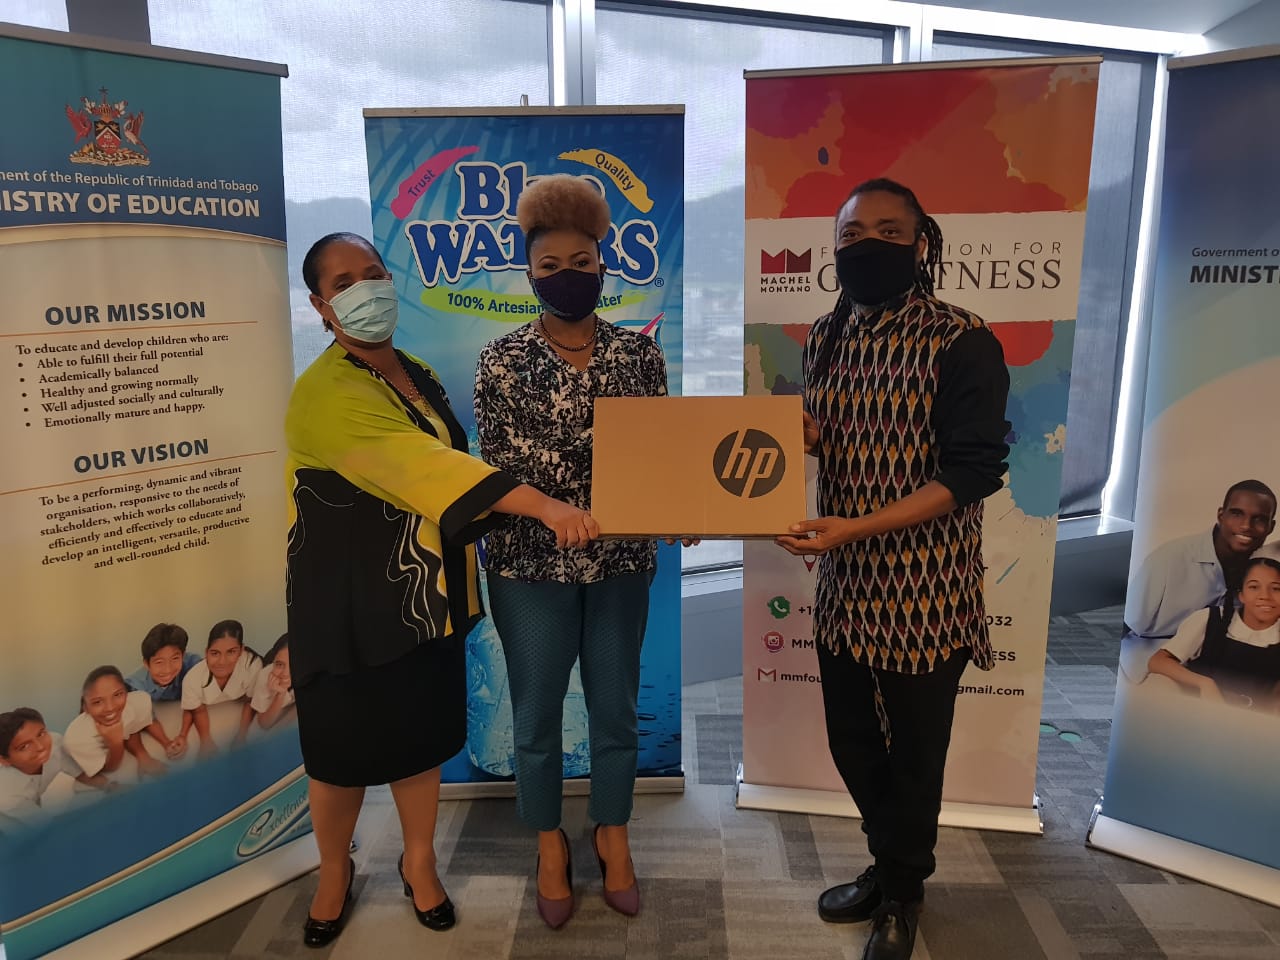 Machel Montano donates devices to the Education Ministry